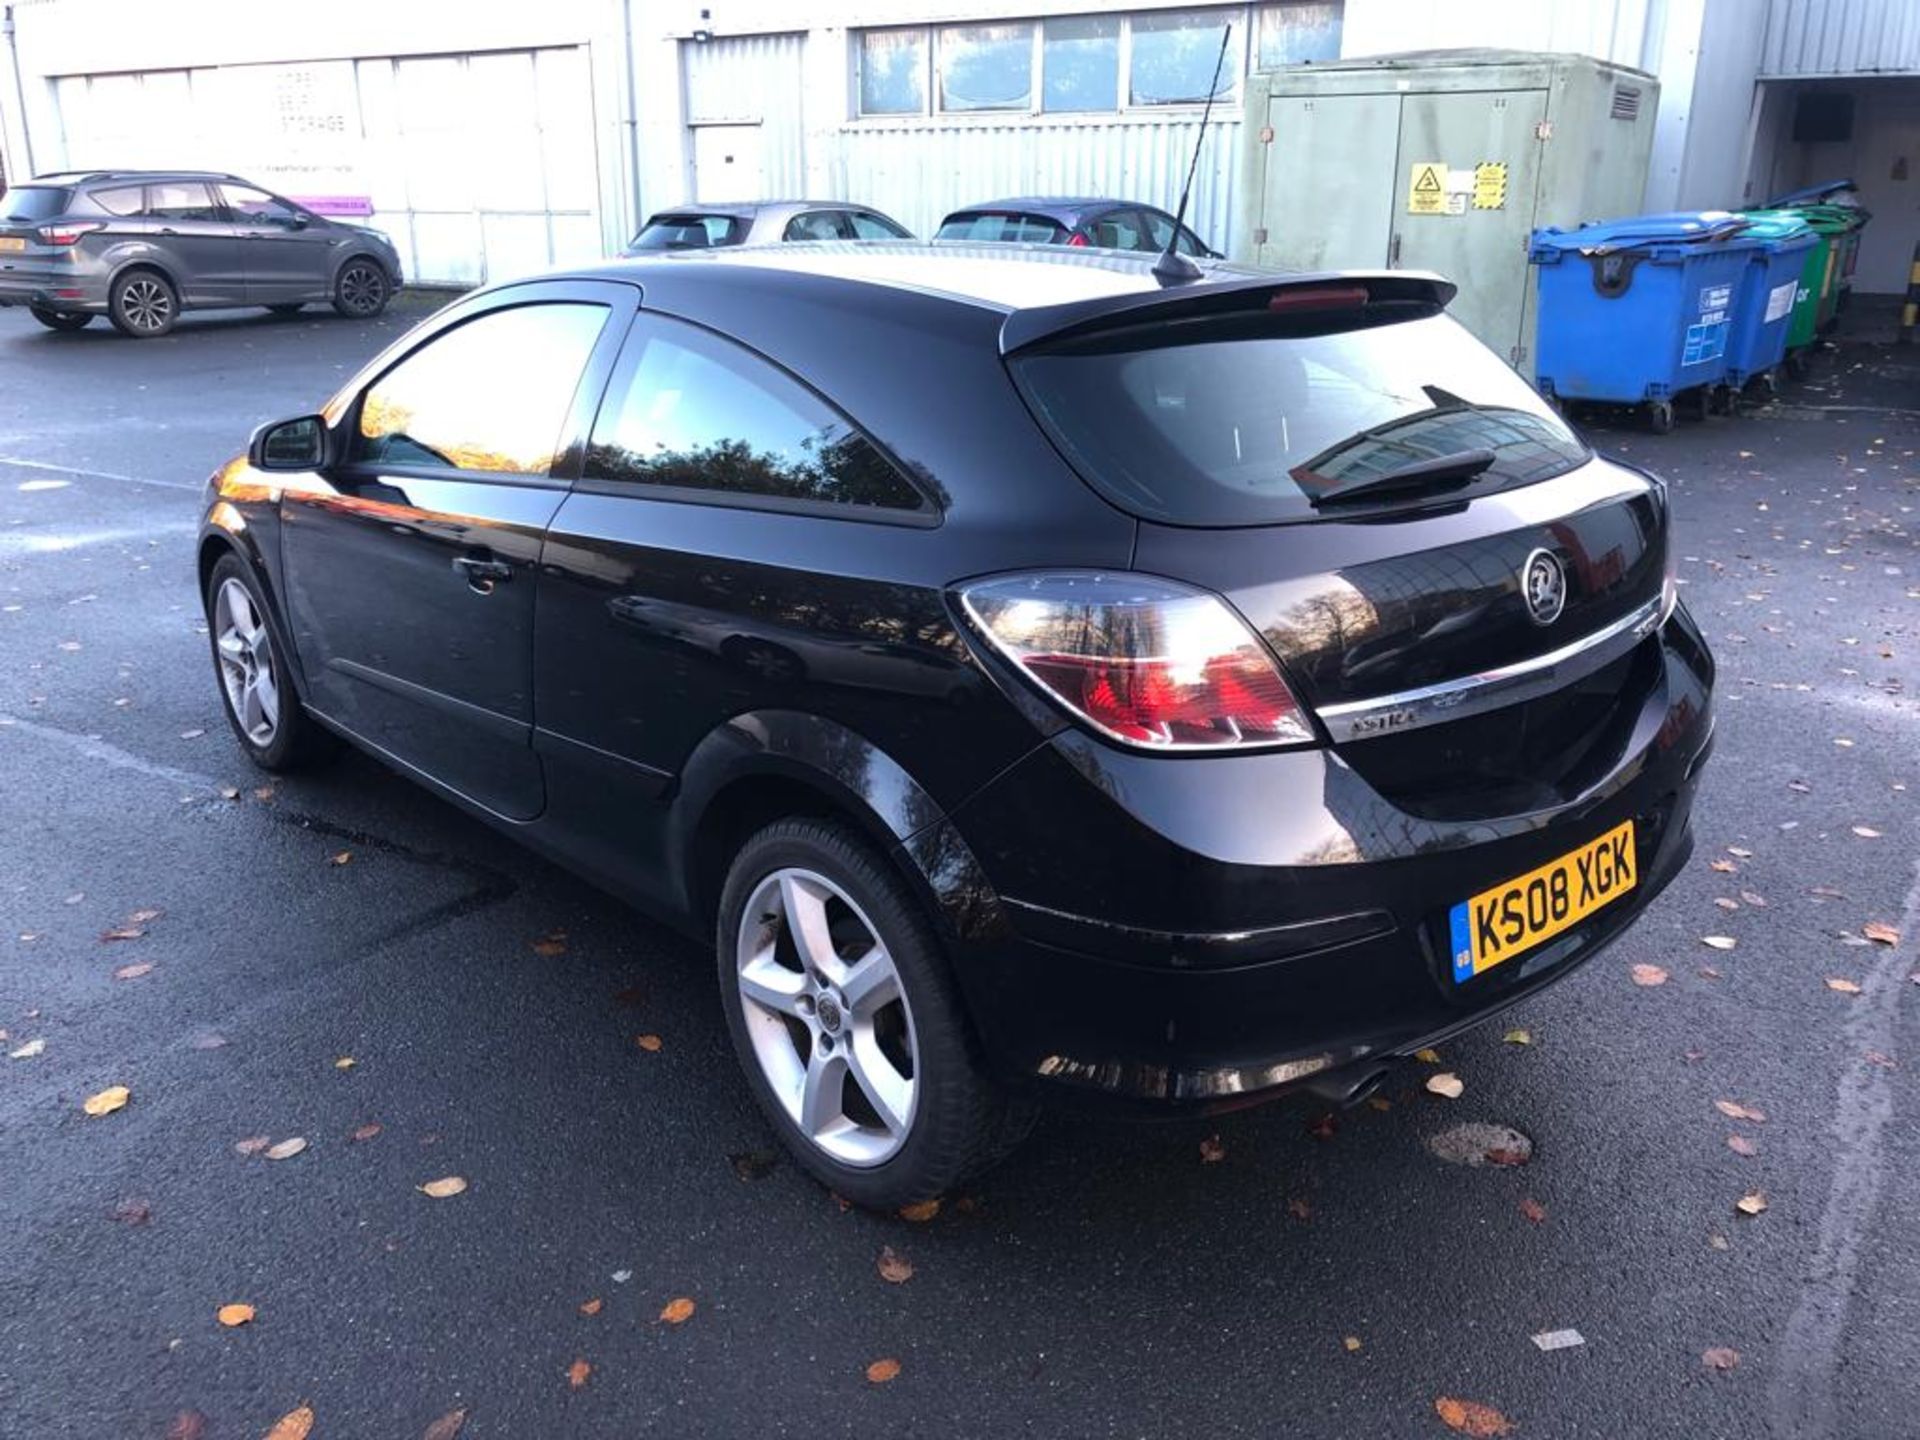 2008 VAUXHALL ASTRA CDTI 3 DOOR HATCHBACK - 139,000 miles **RESERVE JUST REDUCED** - Image 5 of 15